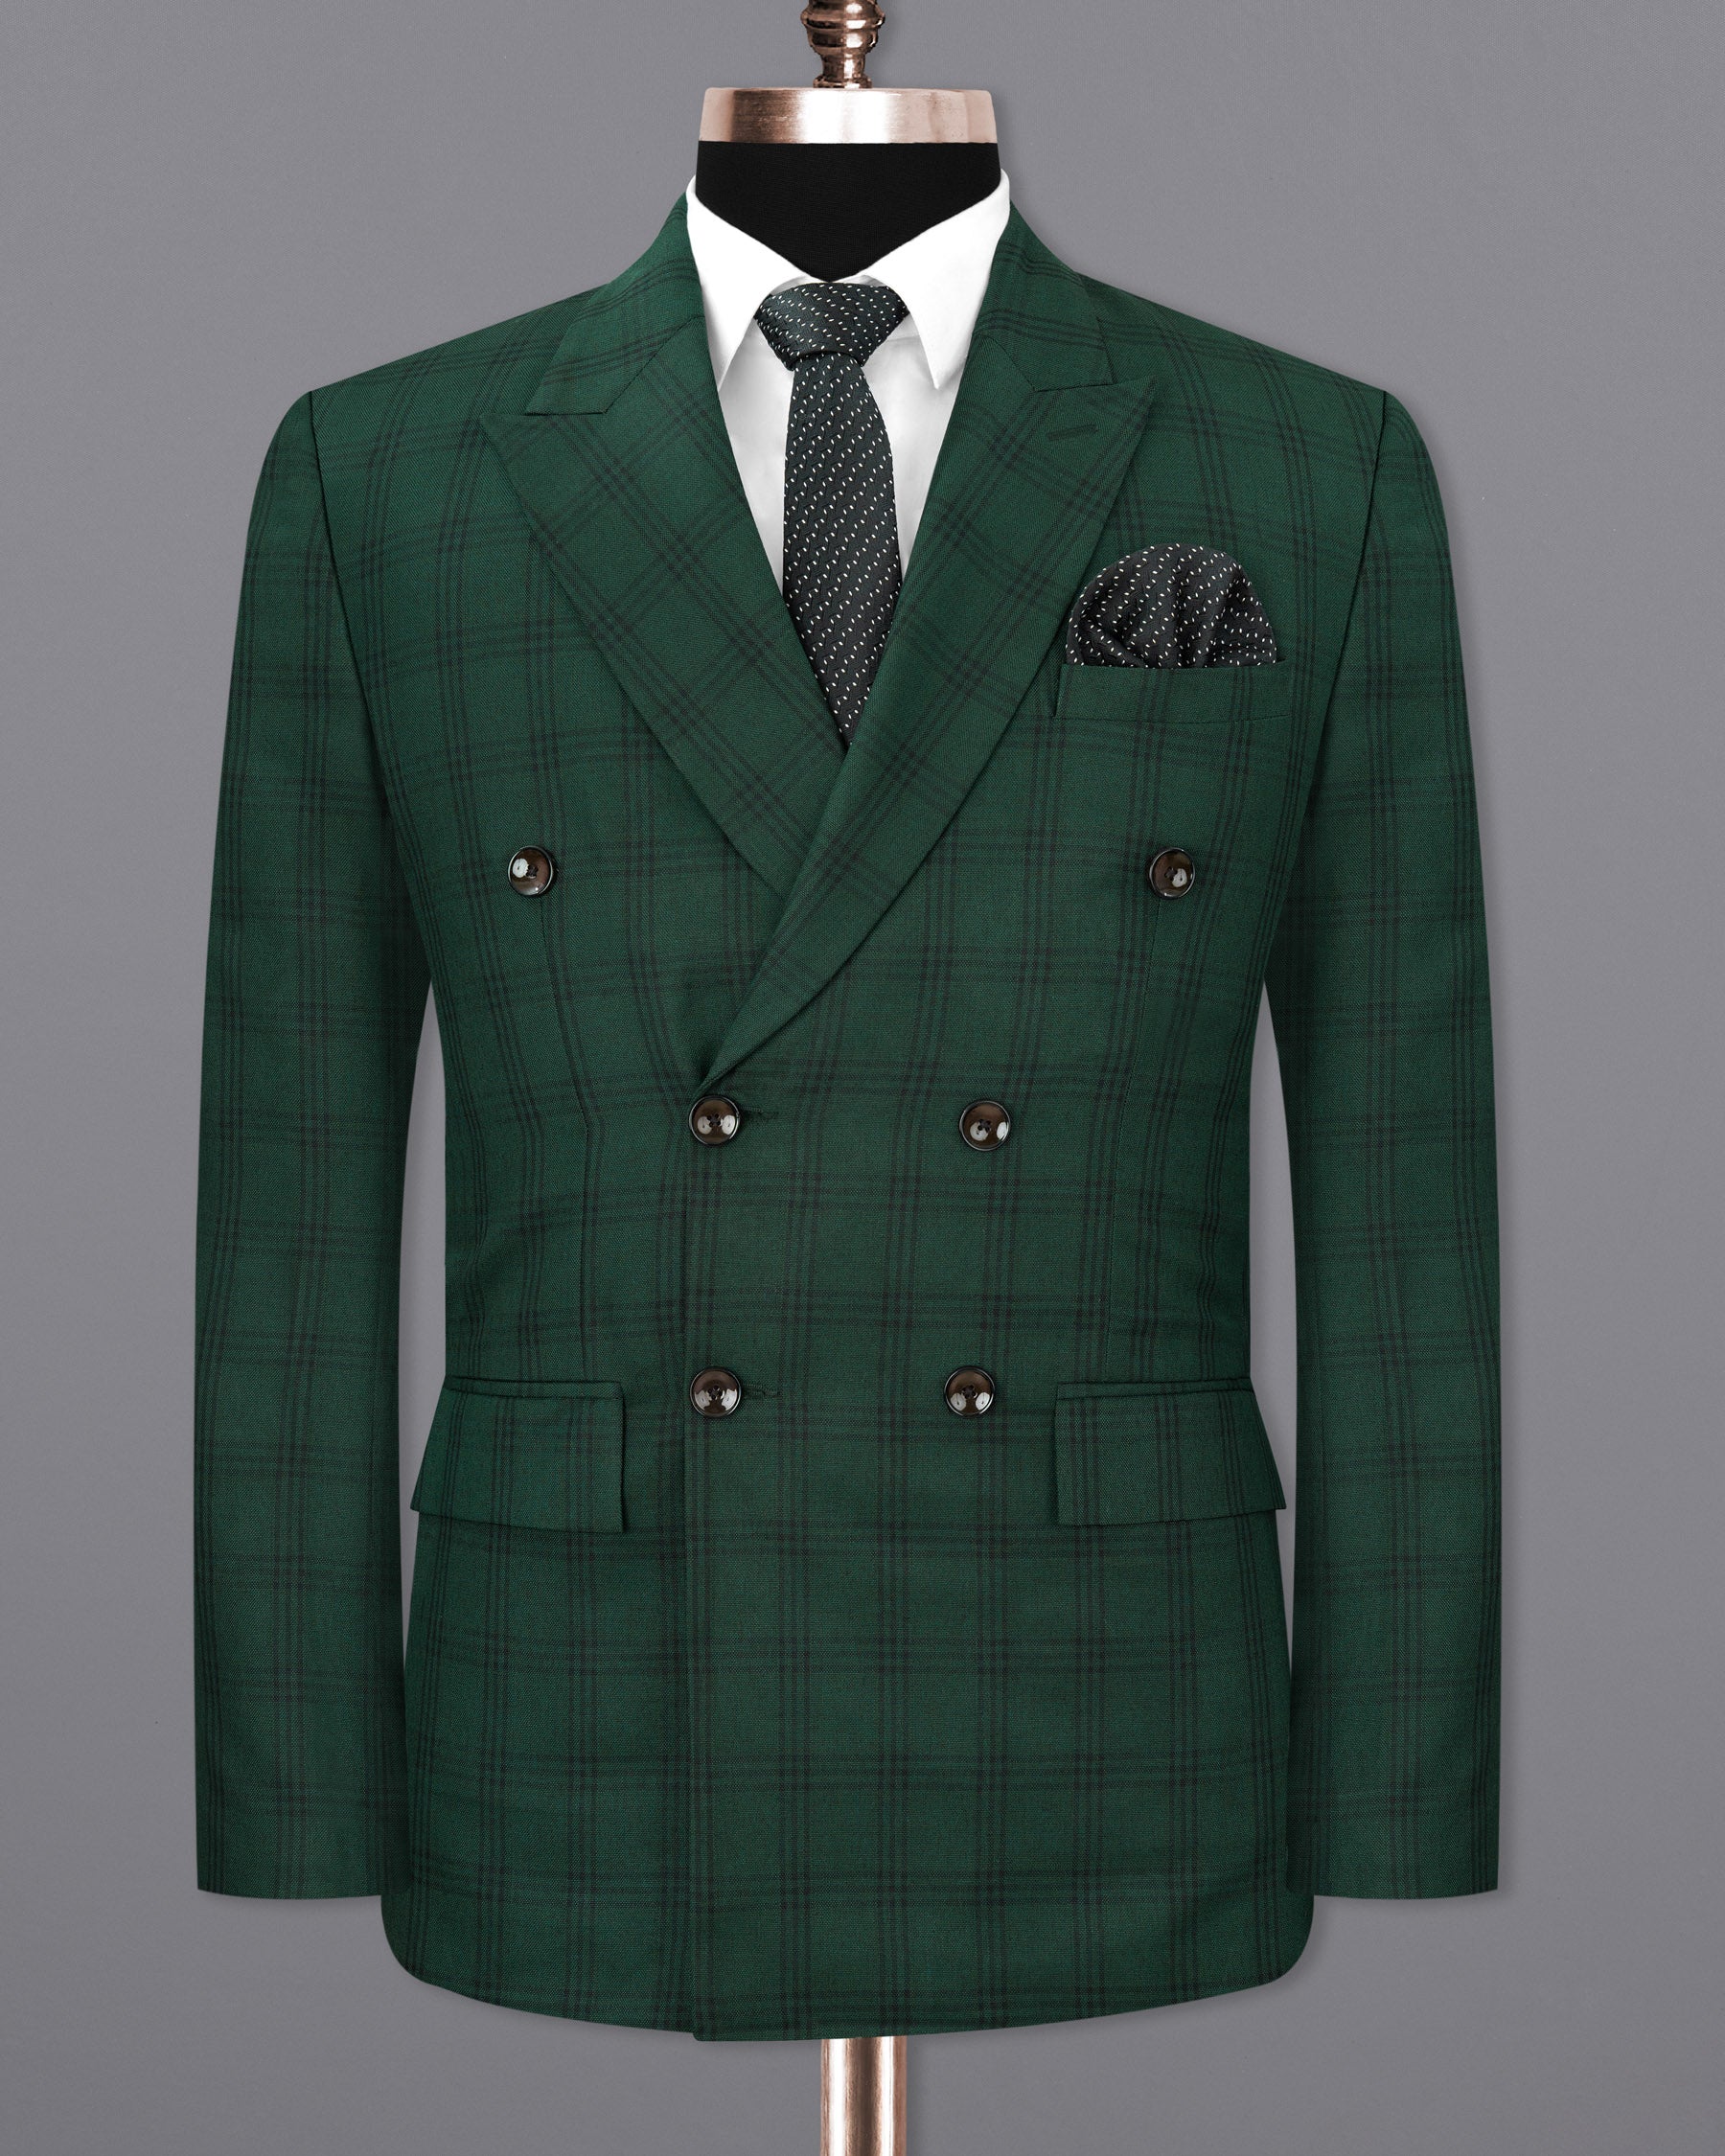 Phthalo Green Windowpane Double Breasted Blazer